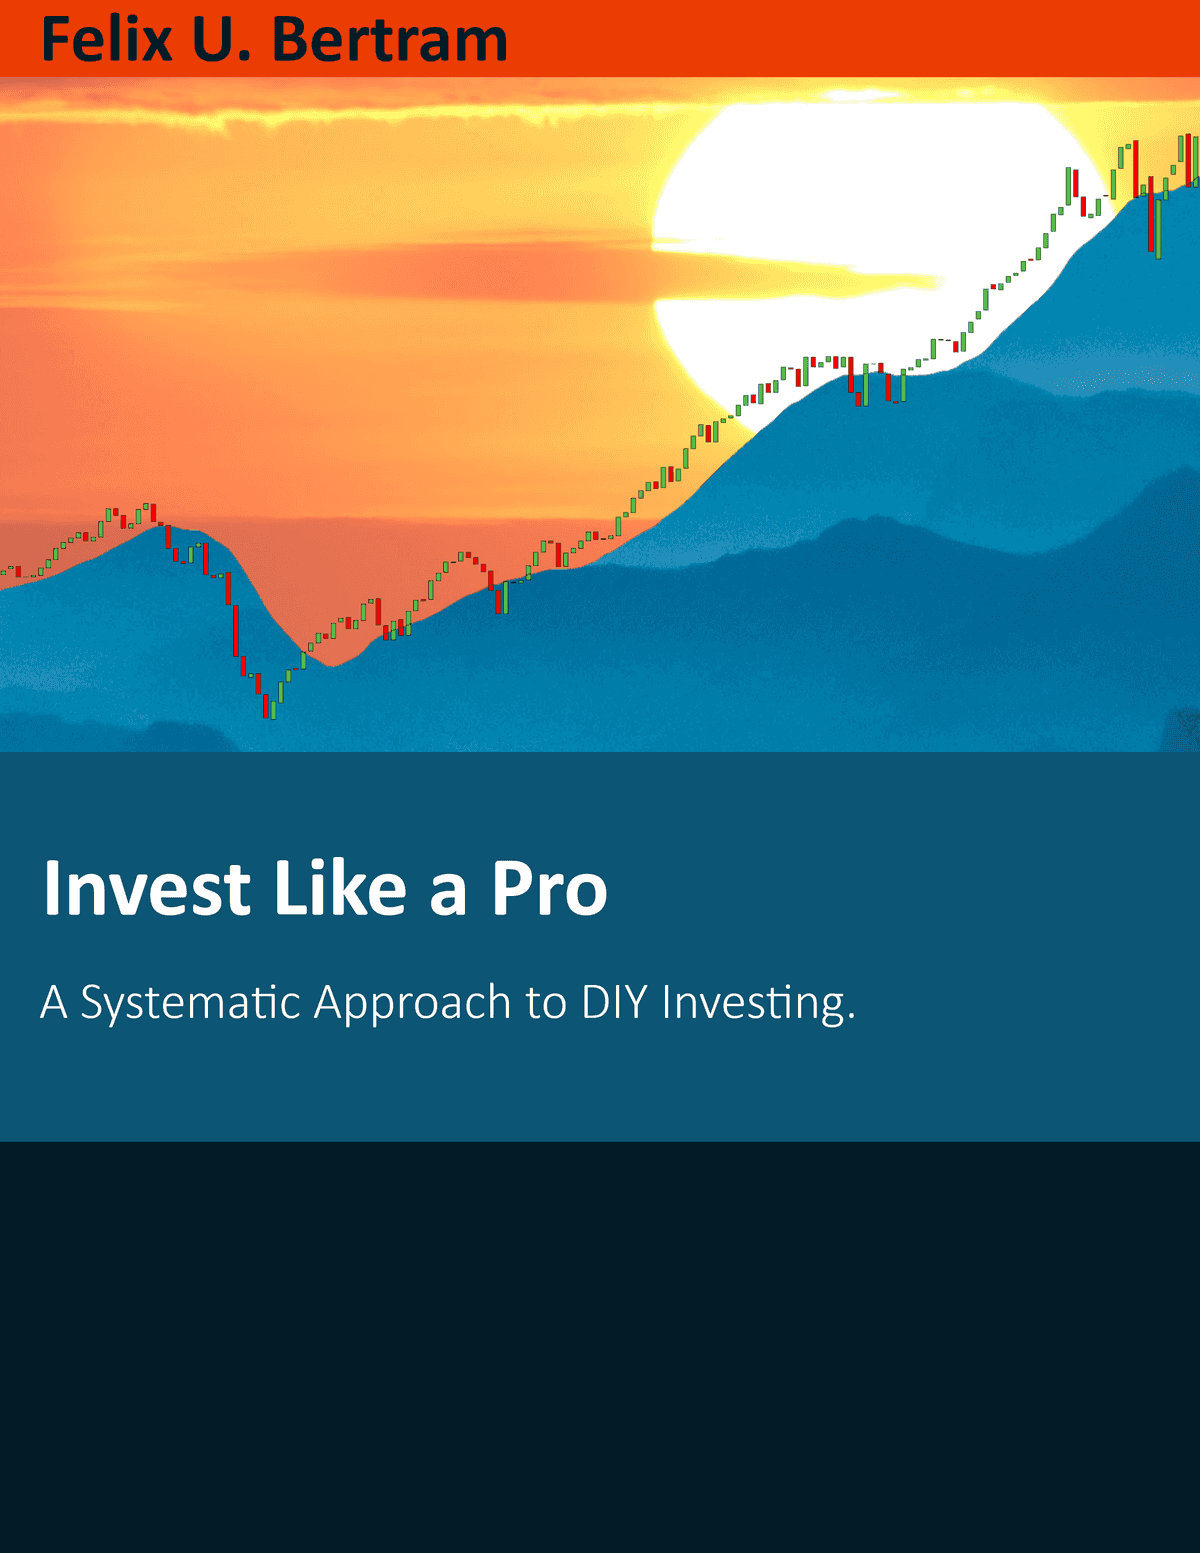 Invest Like a Pro's Commitment: A low-volatility strategy